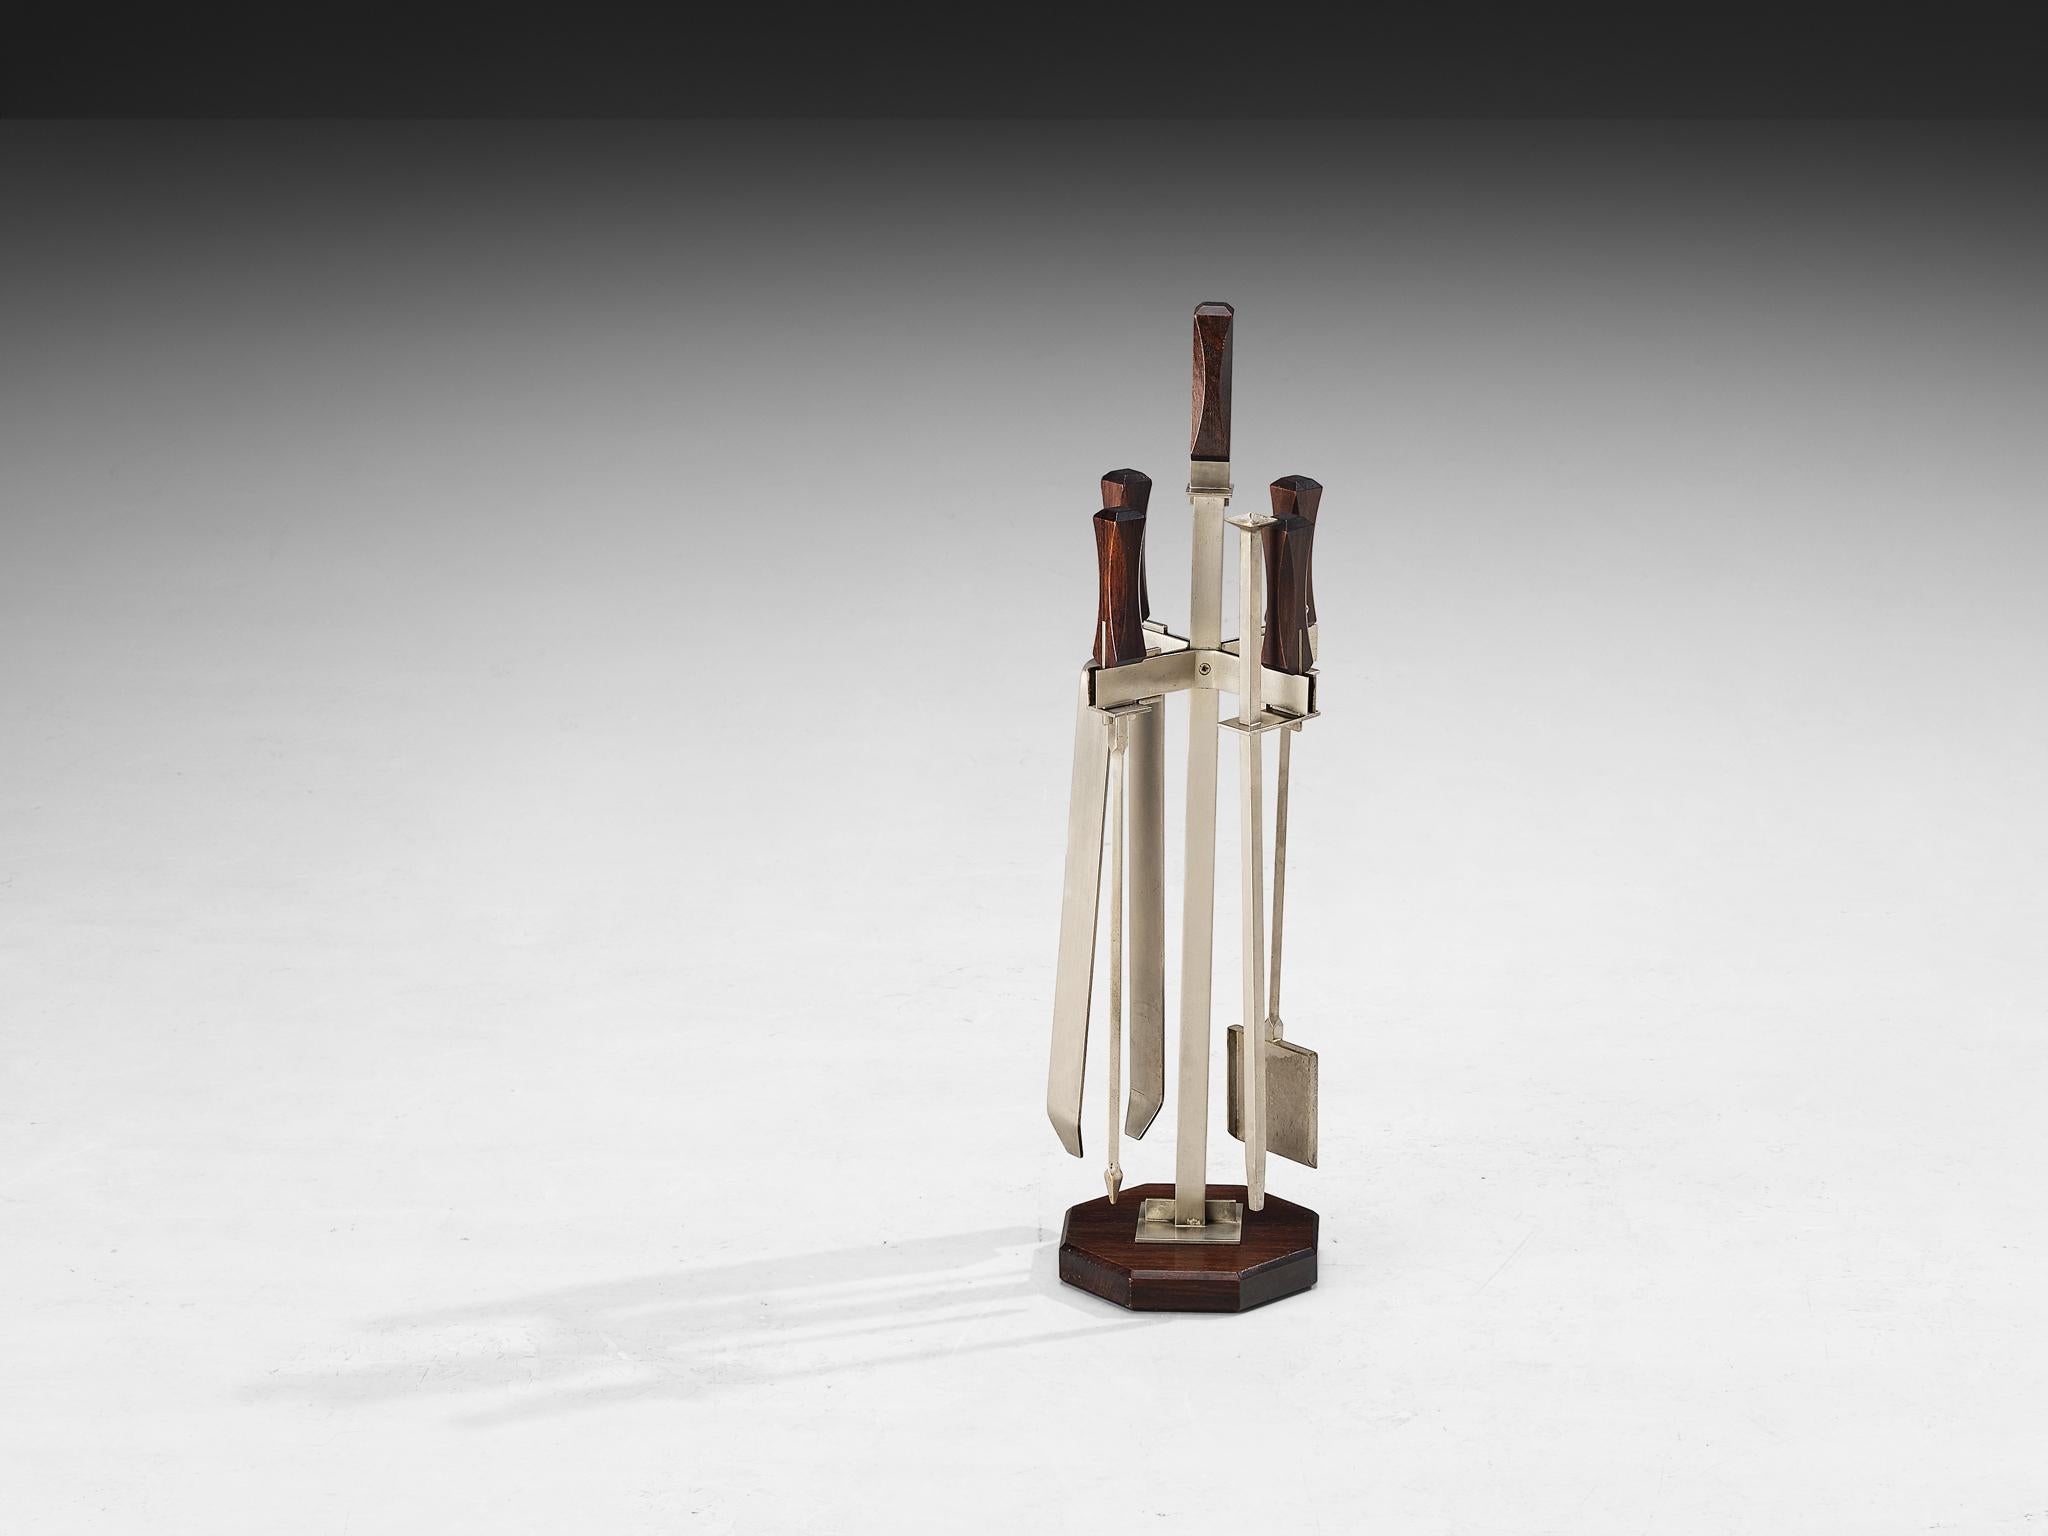 Ico Parisi for Stildomus Selezione, 'Altair' fireplace tools with standard, model '2001', nickel-plated brass, wood, steel, Italy, 1959

The Altair design is a rare creation by Ico Parisi and produced by the Italian company Stildomus, a furniture